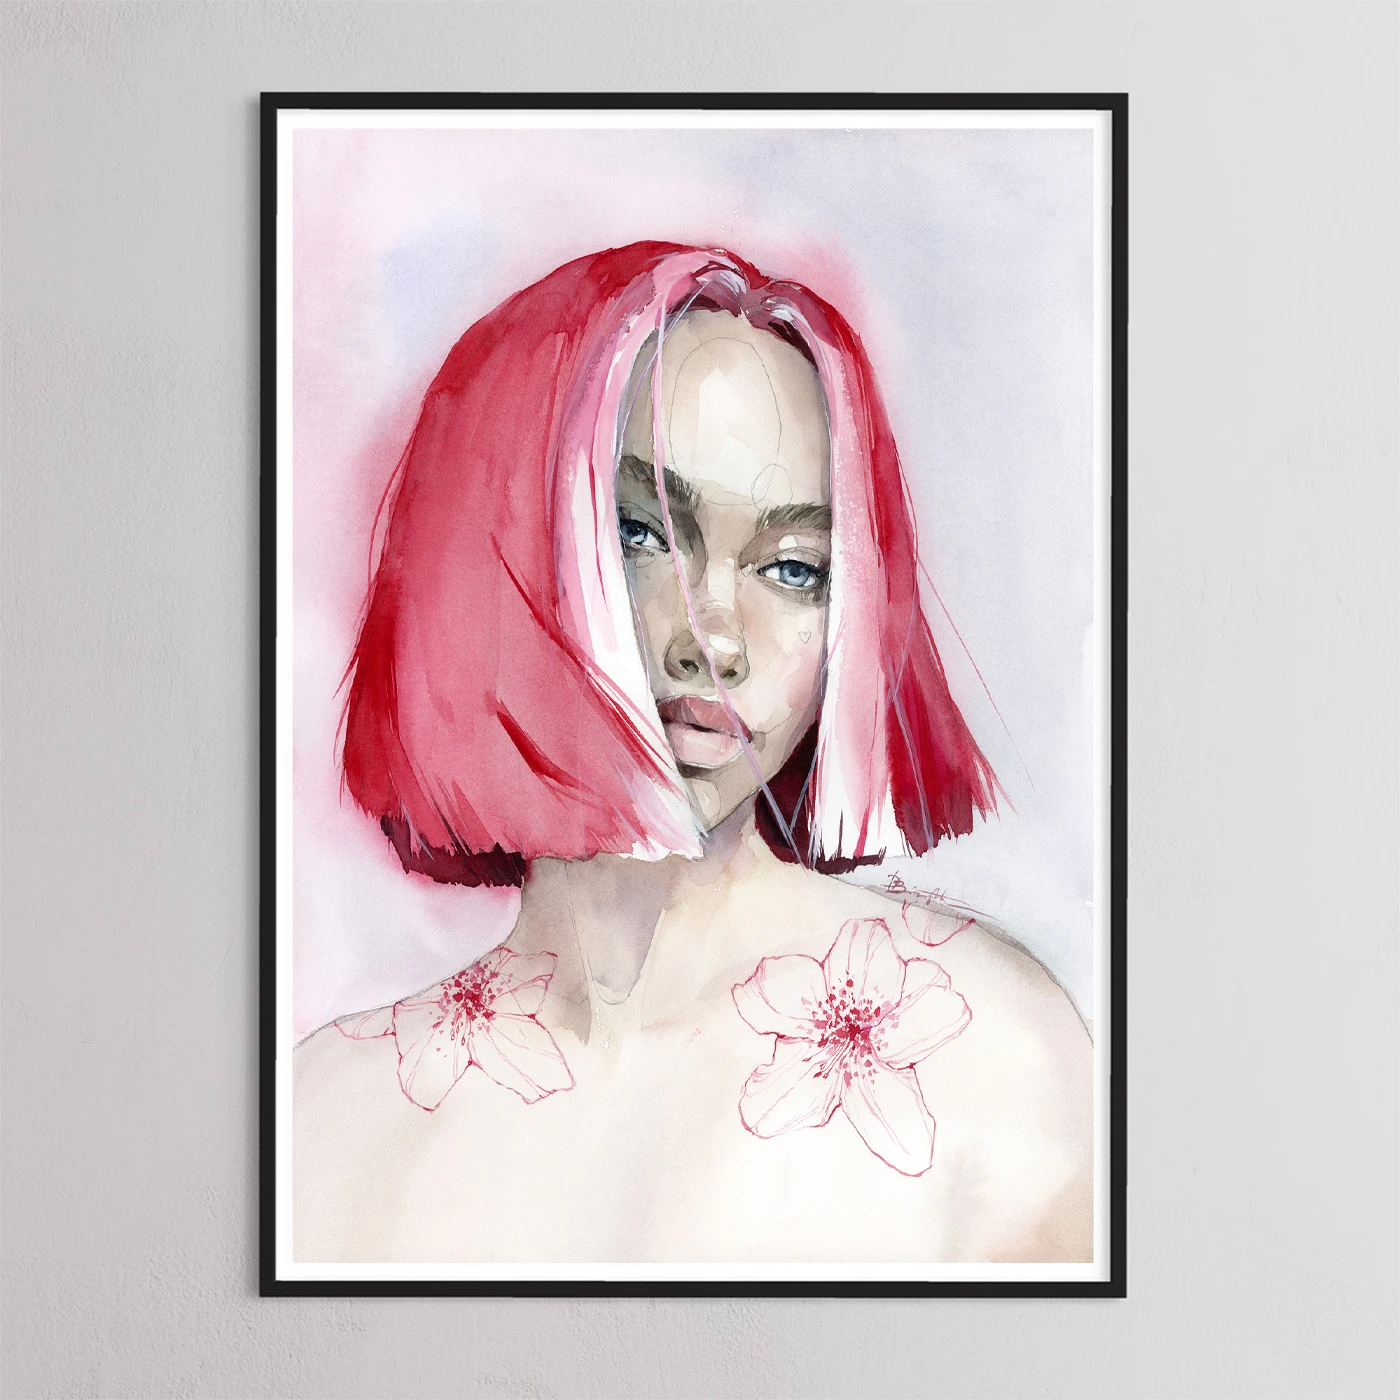 Azalea print from the Dreamy Ones collection by Polina Bright